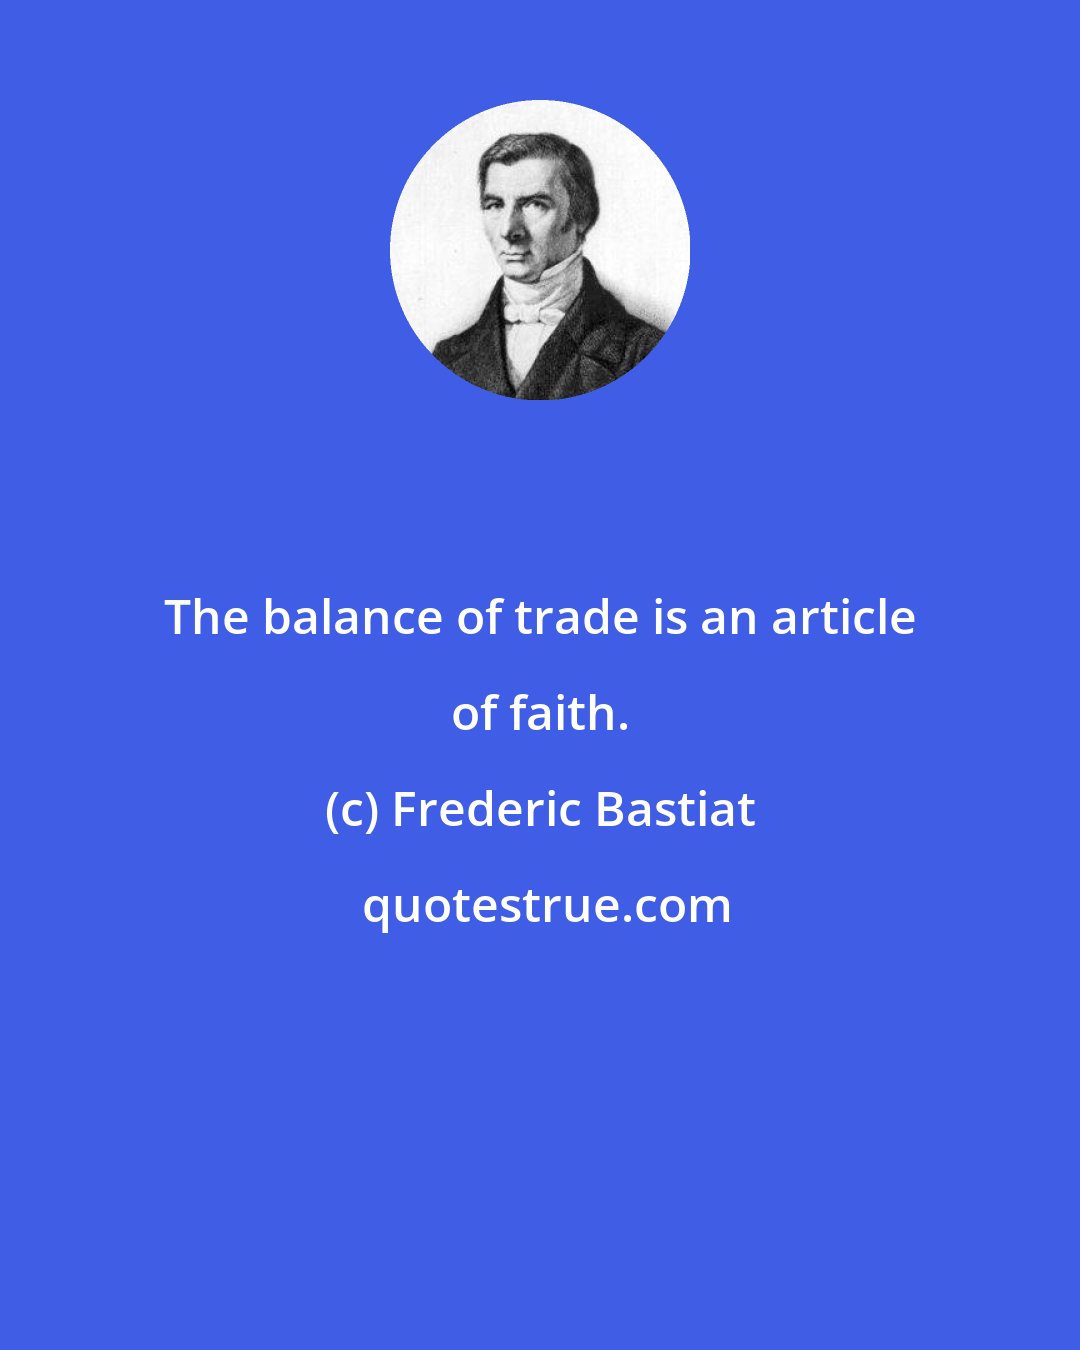 Frederic Bastiat: The balance of trade is an article of faith.